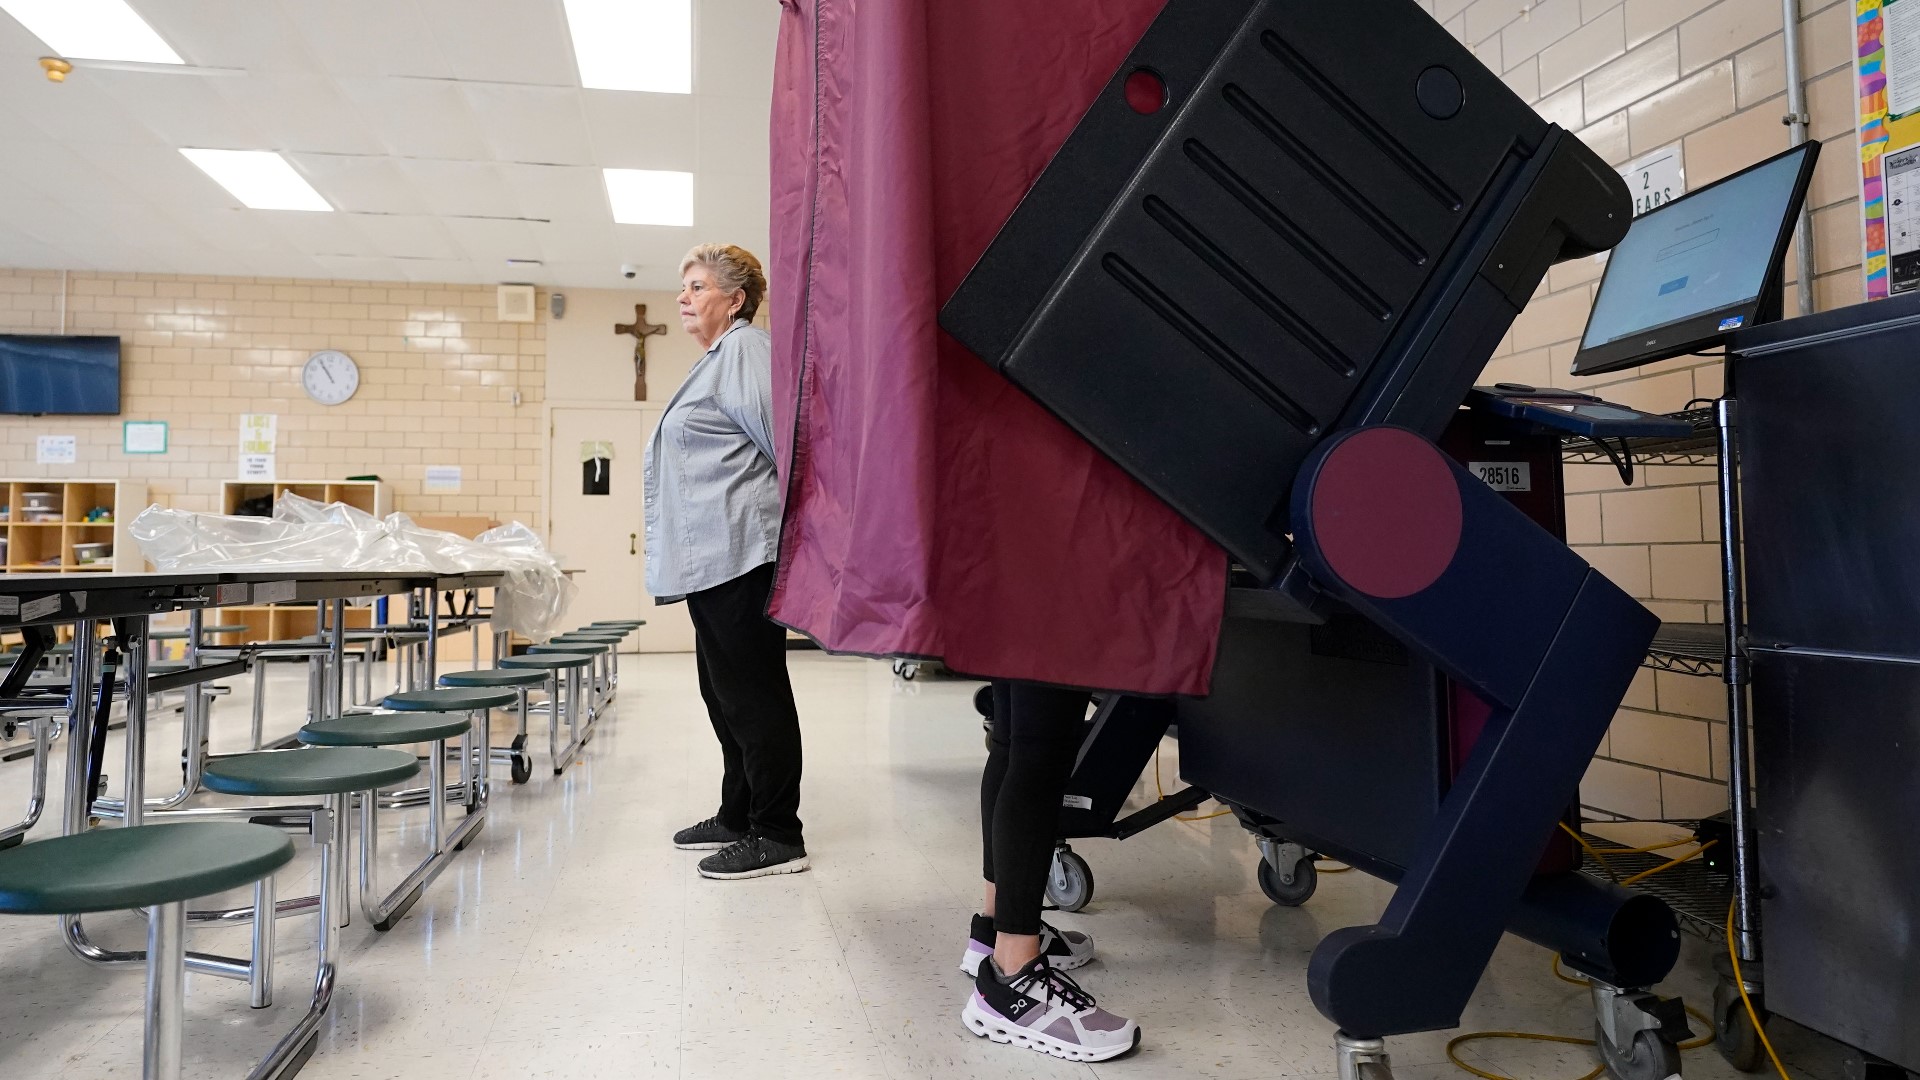 According to the Louisiana Secretary of State's website, the unofficial turnout numbers show less than 36 percent of voters cast their ballot for governor statewide.